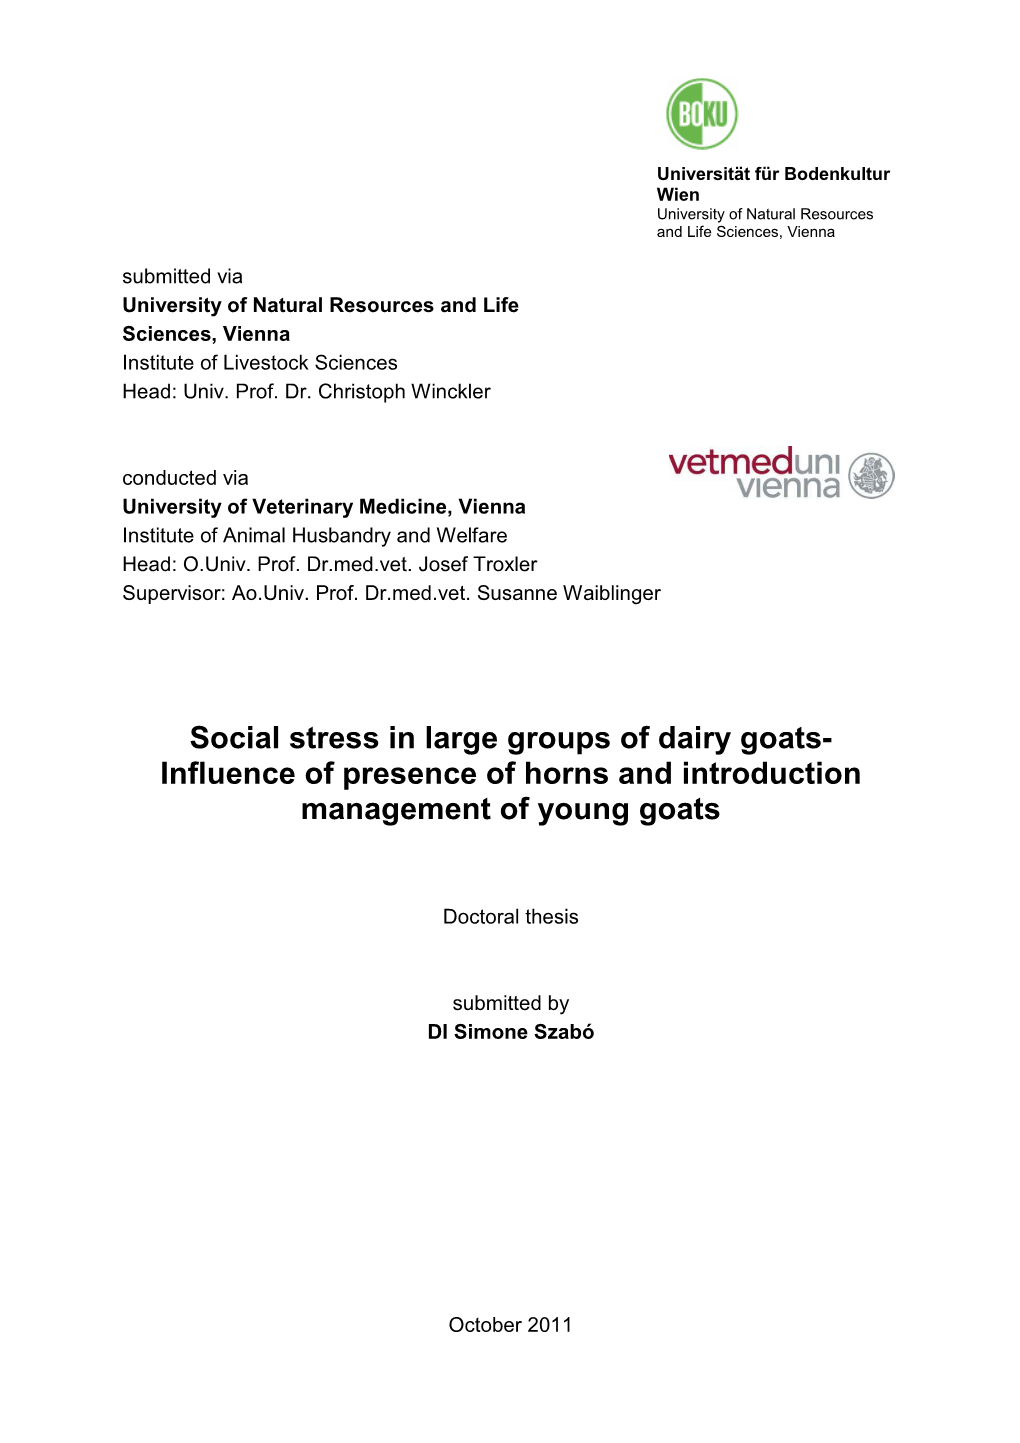 Social Stress in Large Groups of Dairy Goats- Influence of Presence of Horns and Introduction Management of Young Goats